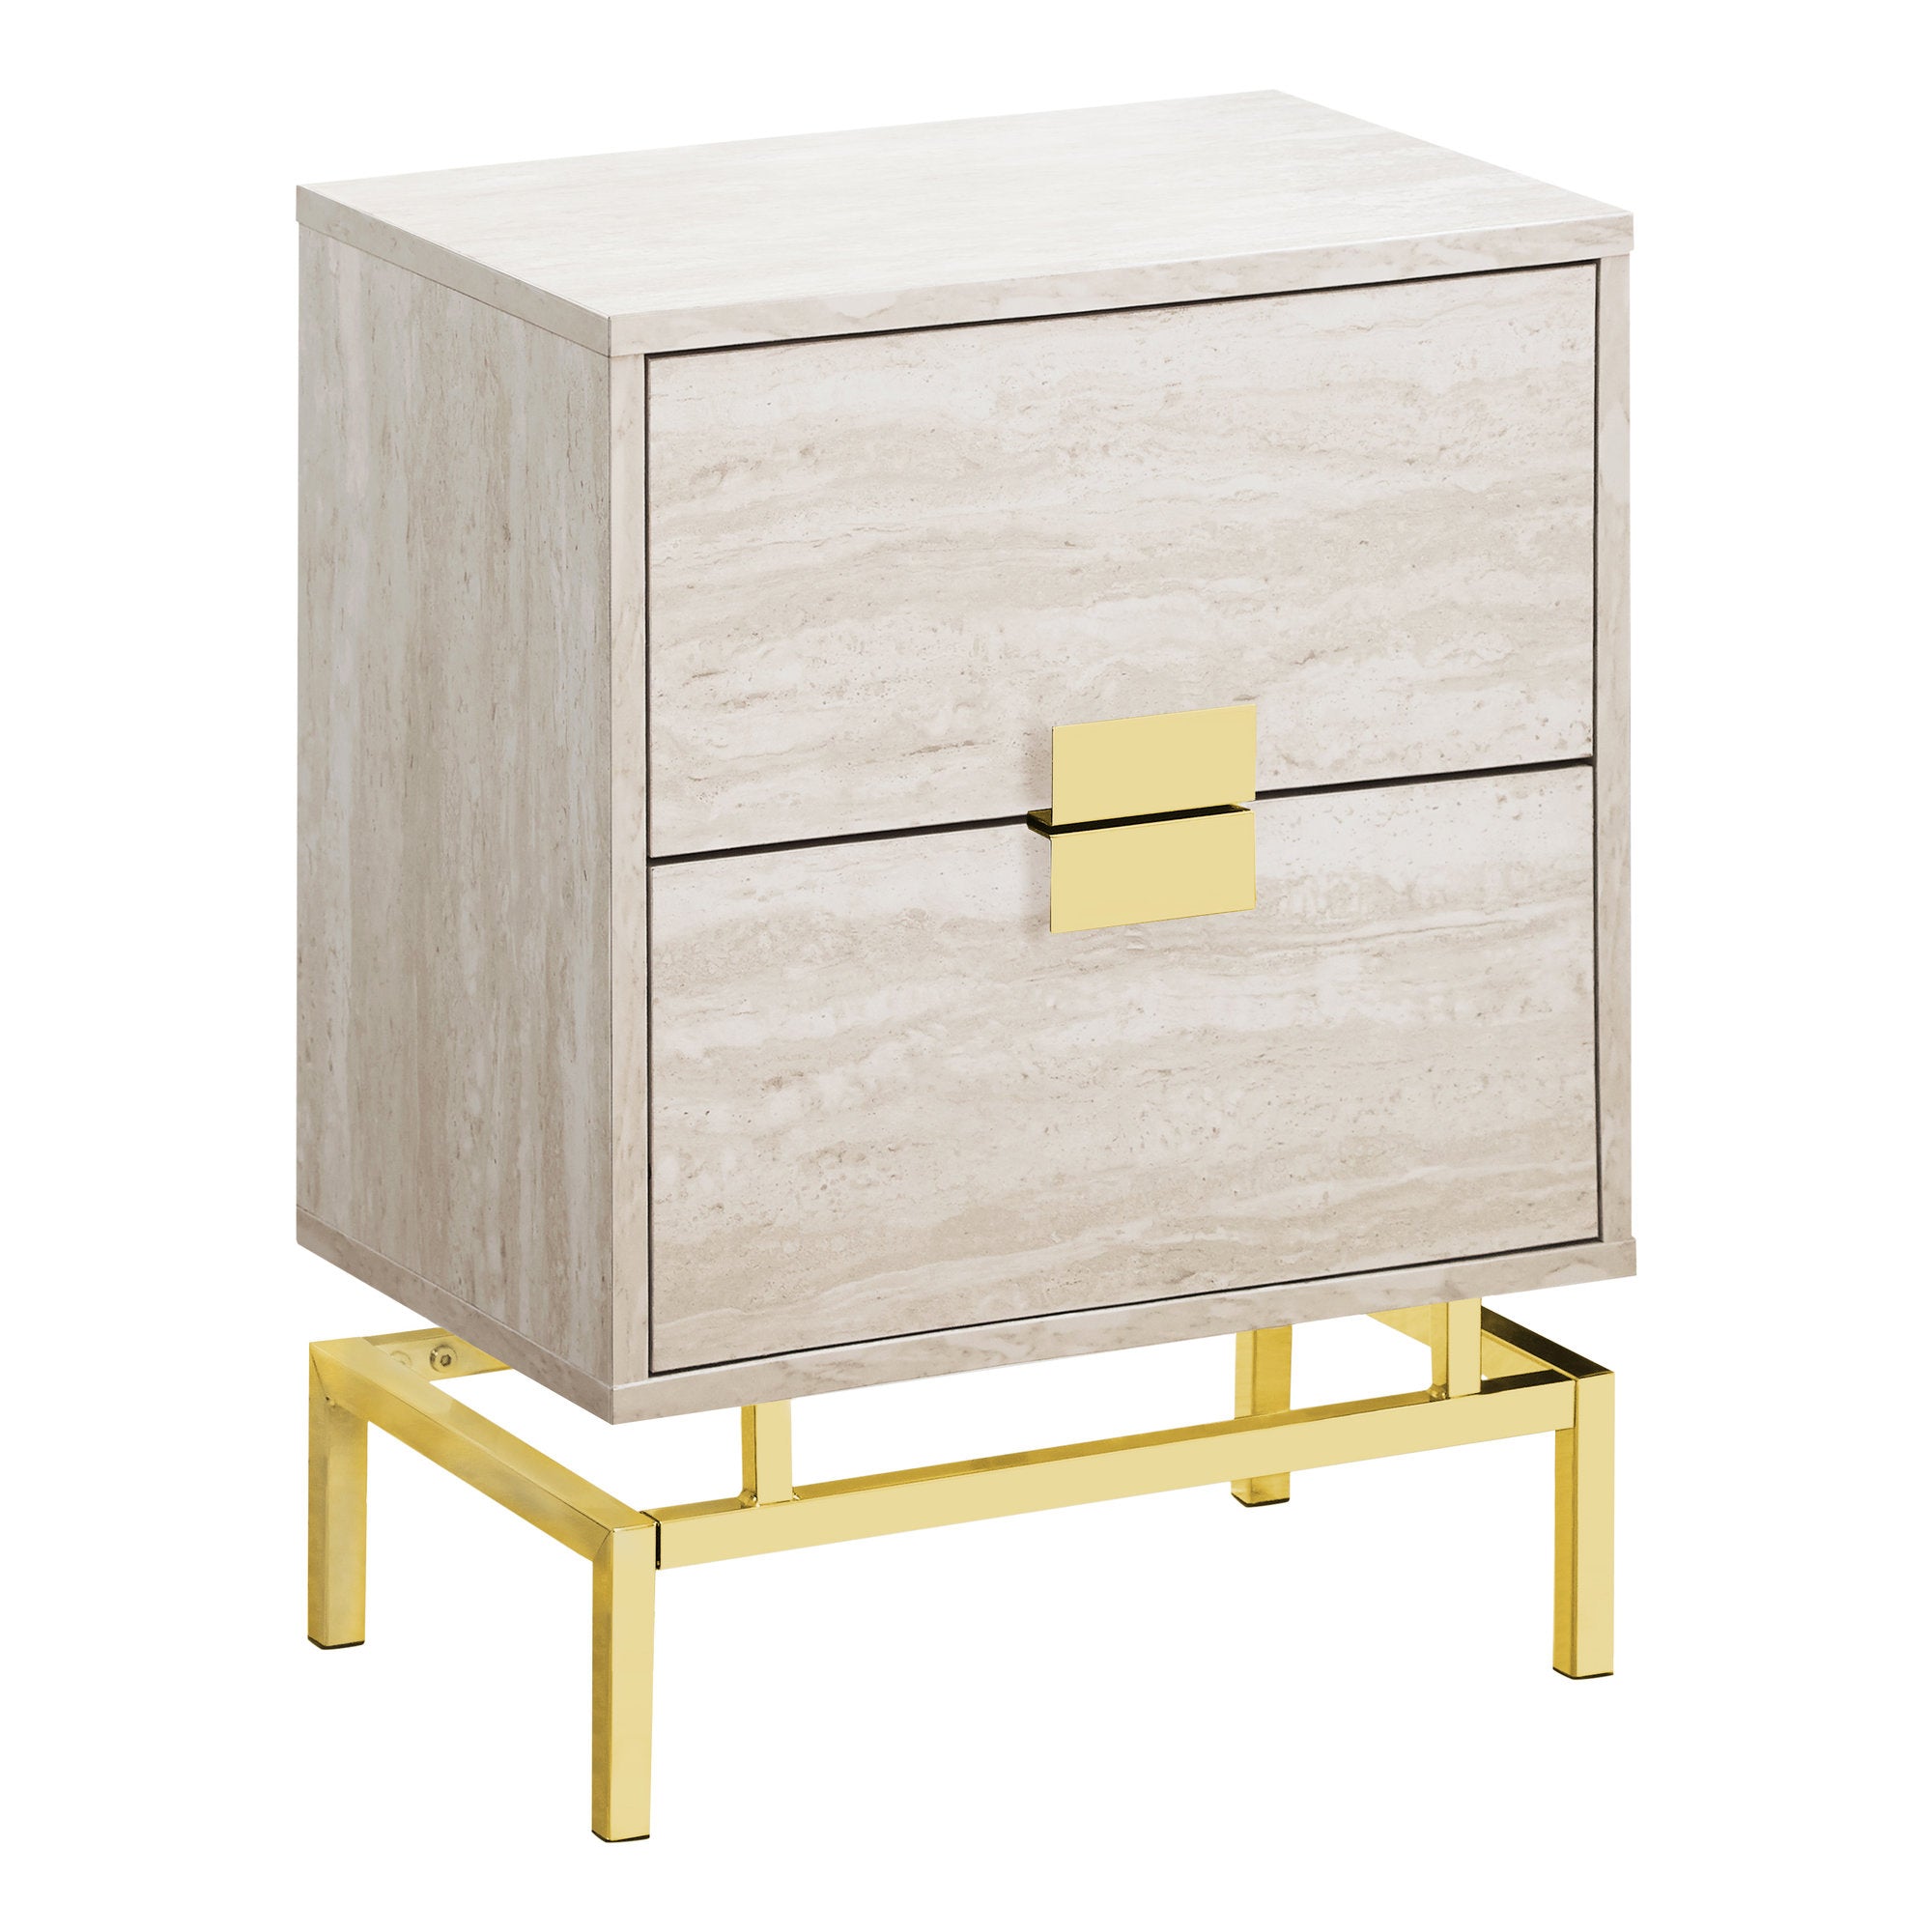 MN-953493    Accent Table, Side, End, Nightstand, Lamp, Living Room, Bedroom, Metal Legs, Laminate, Beige Marble, Gold, Contemporary, Modern